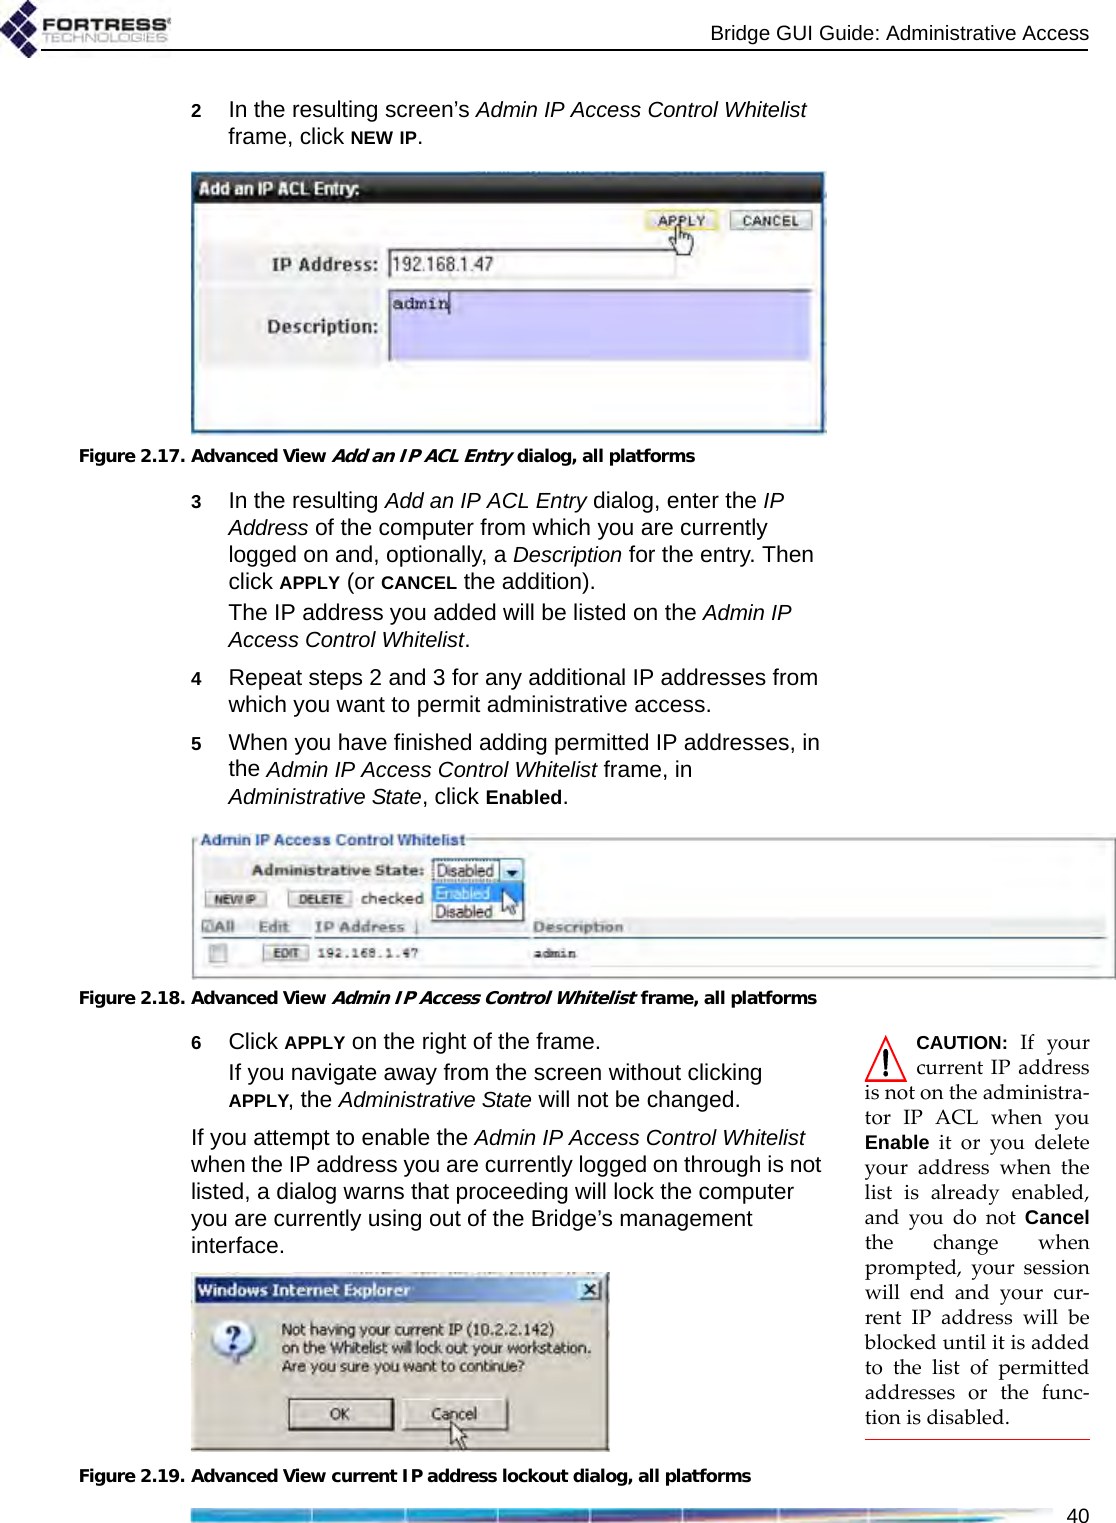 Bridge GUI Guide: Administrative Access402In the resulting screen’s Admin IP Access Control Whitelist frame, click NEW IP.Figure 2.17. Advanced View Add an IP ACL Entry dialog, all platforms3In the resulting Add an IP ACL Entry dialog, enter the IP Address of the computer from which you are currently logged on and, optionally, a Description for the entry. Then click APPLY (or CANCEL the addition).The IP address you added will be listed on the Admin IP Access Control Whitelist.4Repeat steps 2 and 3 for any additional IP addresses from which you want to permit administrative access.5When you have finished adding permitted IP addresses, in the Admin IP Access Control Whitelist frame, in Administrative State, click Enabled.Figure 2.18. Advanced View Admin IP Access Control Whitelist frame, all platformsCAUTION: If yourcurrent IP addressis not on the administra-tor IP ACL when youEnable it or you deleteyour address when thelist is already enabled,and you do not Cancelthe change whenprompted, your sessionwill end and your cur-rent IP address will beblocked until it is addedto the list of permittedaddresses or the func-tion is disabled.6Click APPLY on the right of the frame.If you navigate away from the screen without clicking APPLY, the Administrative State will not be changed.If you attempt to enable the Admin IP Access Control Whitelist when the IP address you are currently logged on through is not listed, a dialog warns that proceeding will lock the computer you are currently using out of the Bridge’s management interface. Figure 2.19. Advanced View current IP address lockout dialog, all platforms